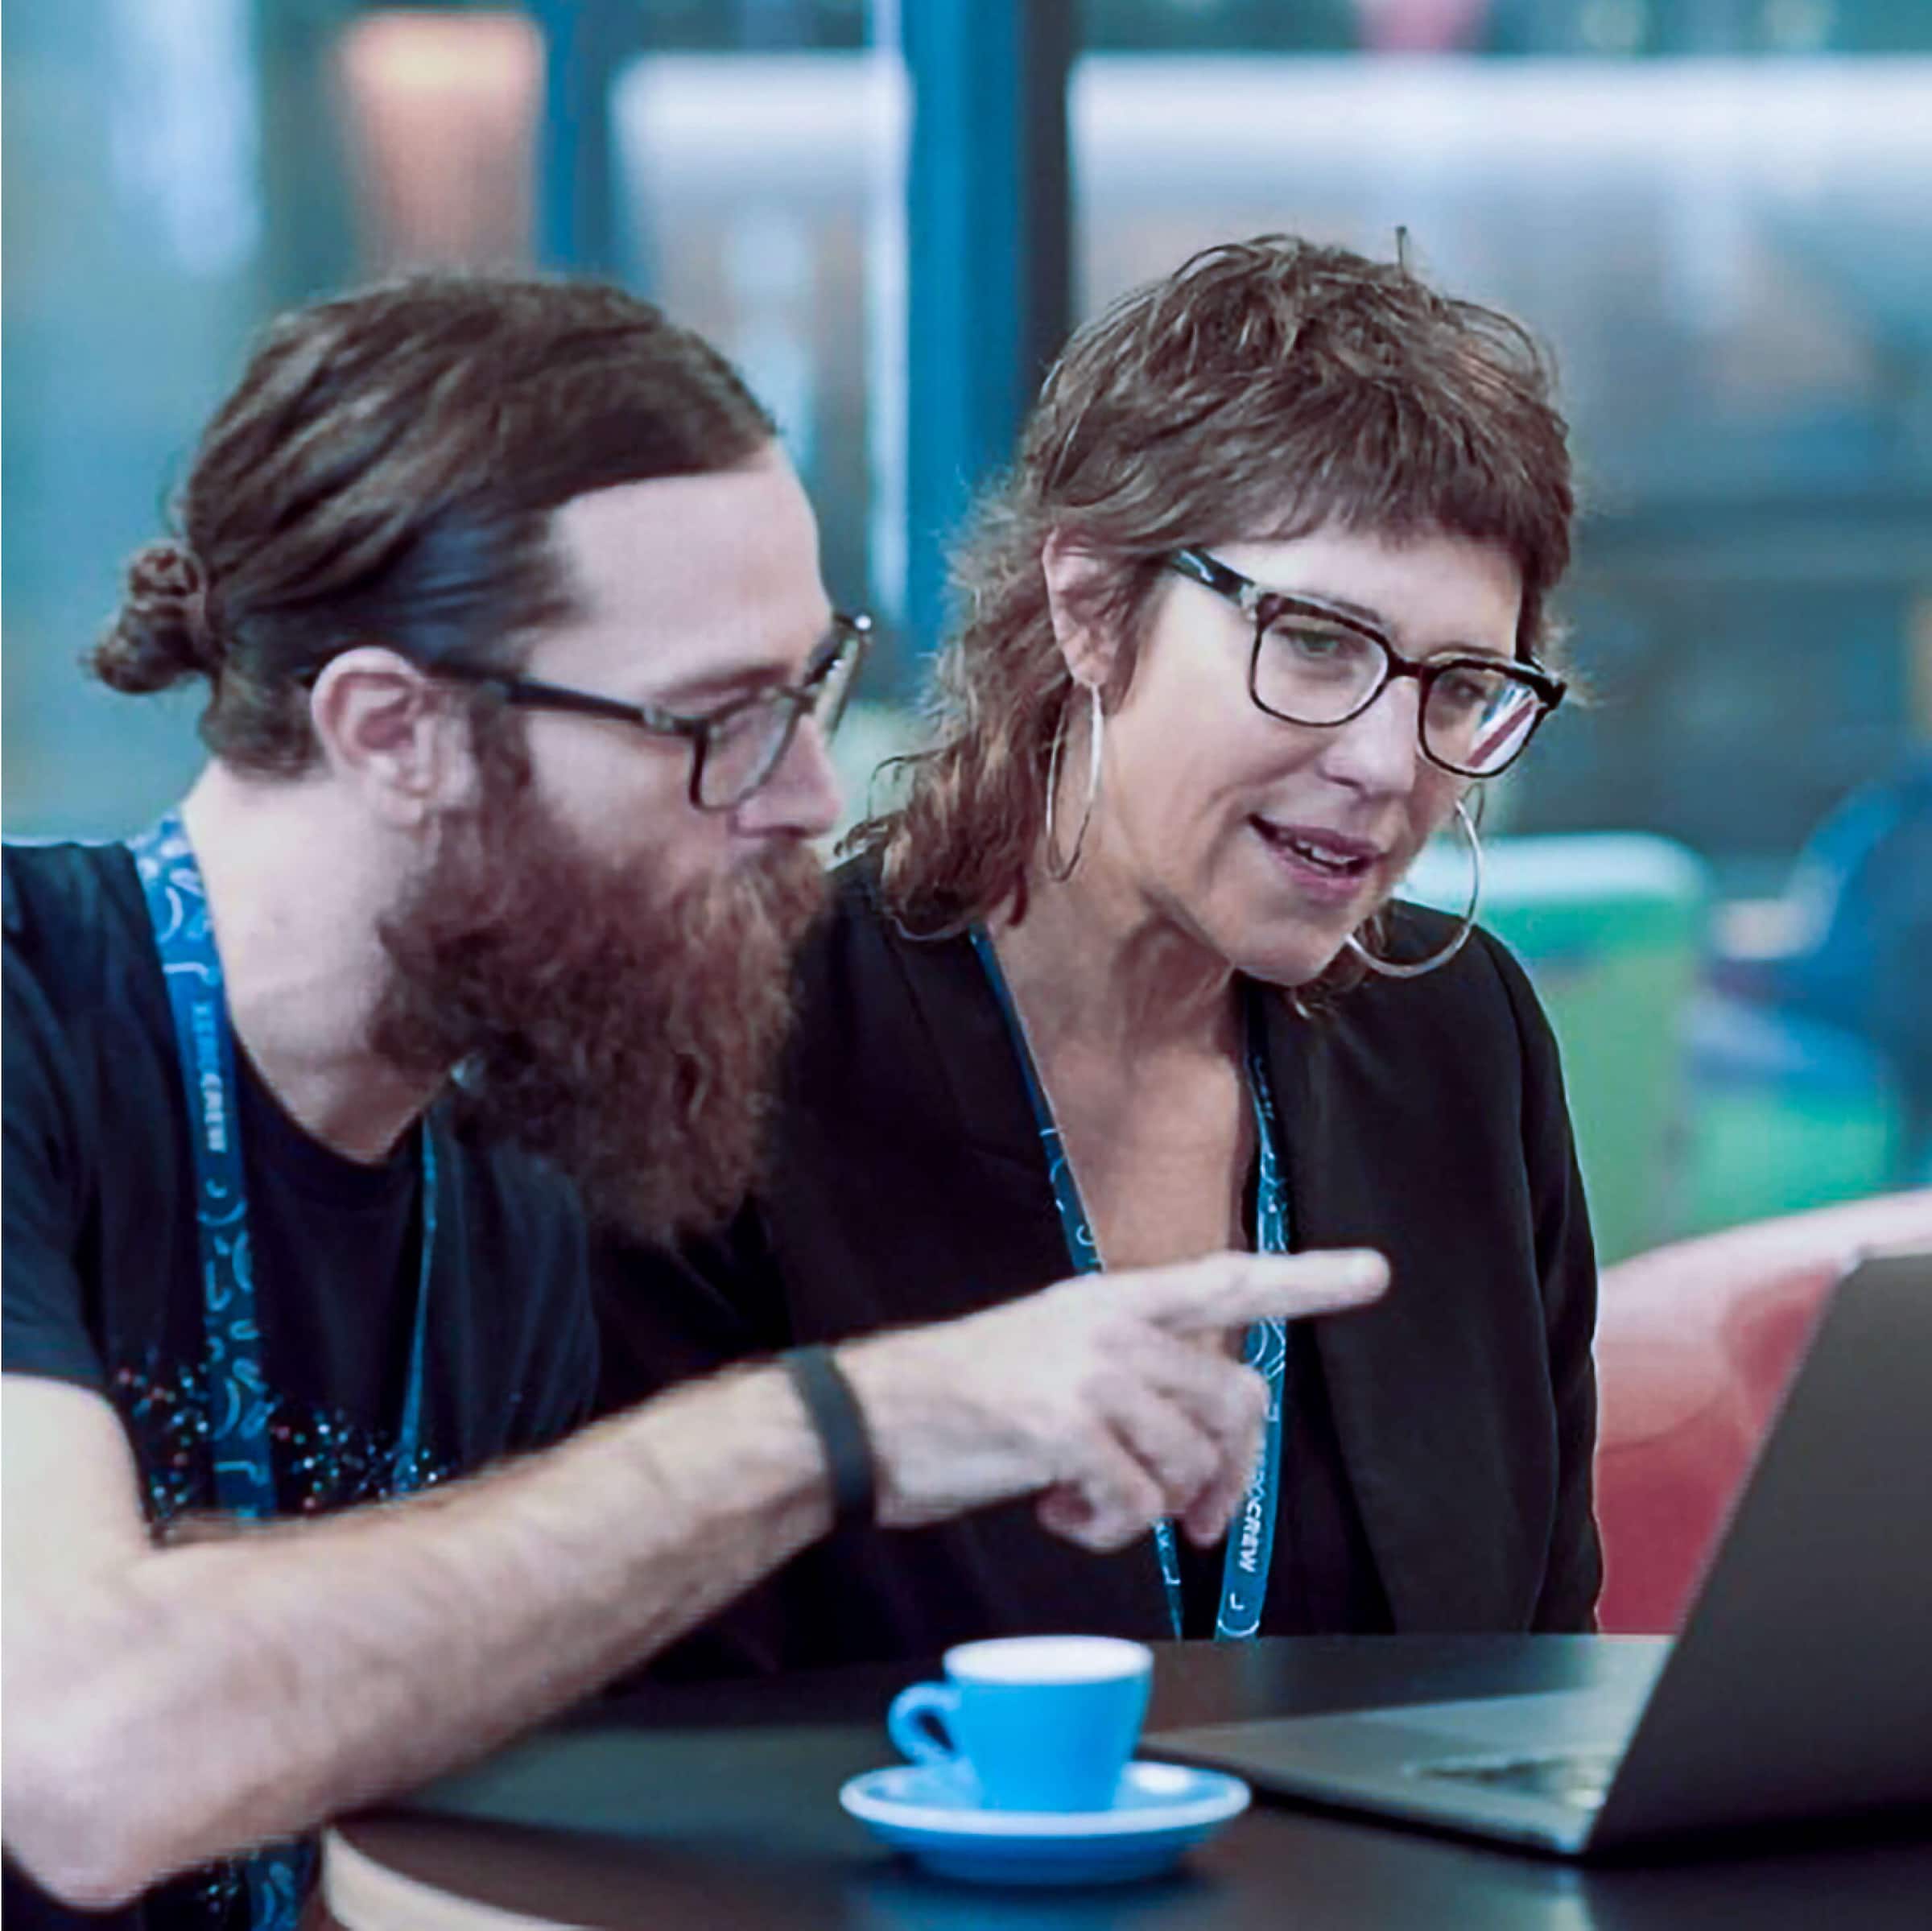 Two designers look at a laptop screen while discussing design ideas.